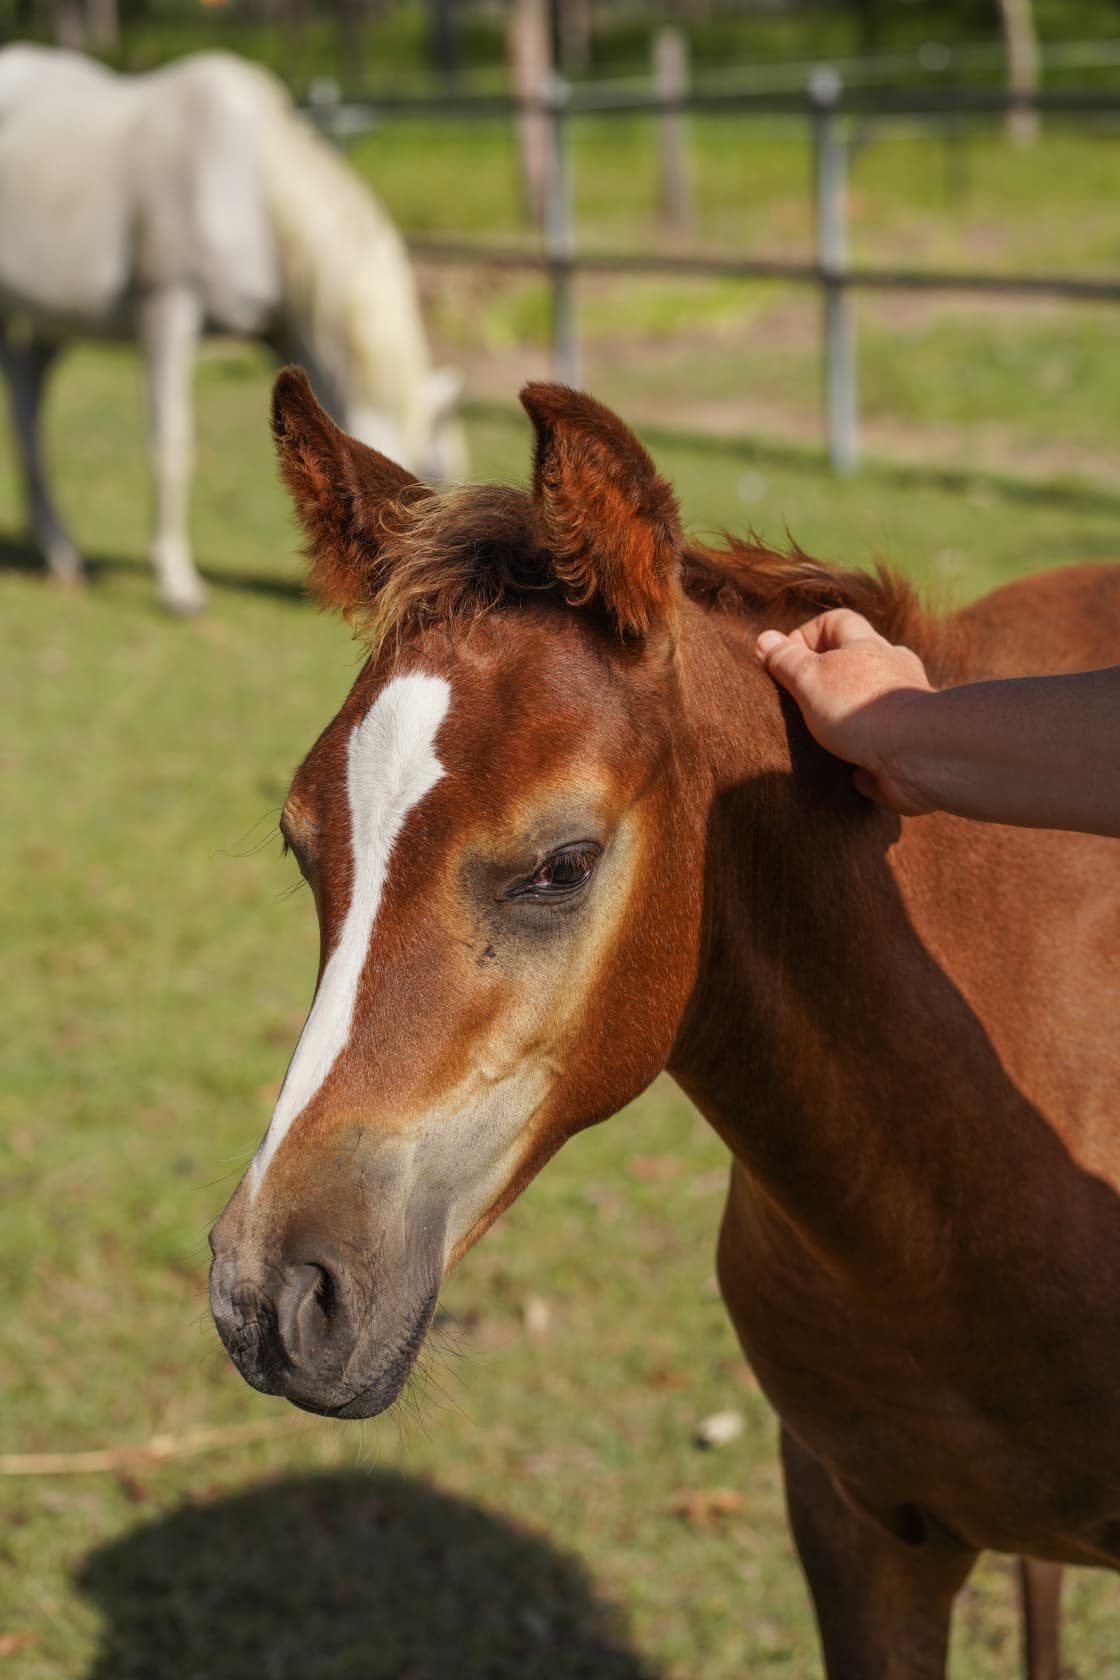 one of the adorable little foals